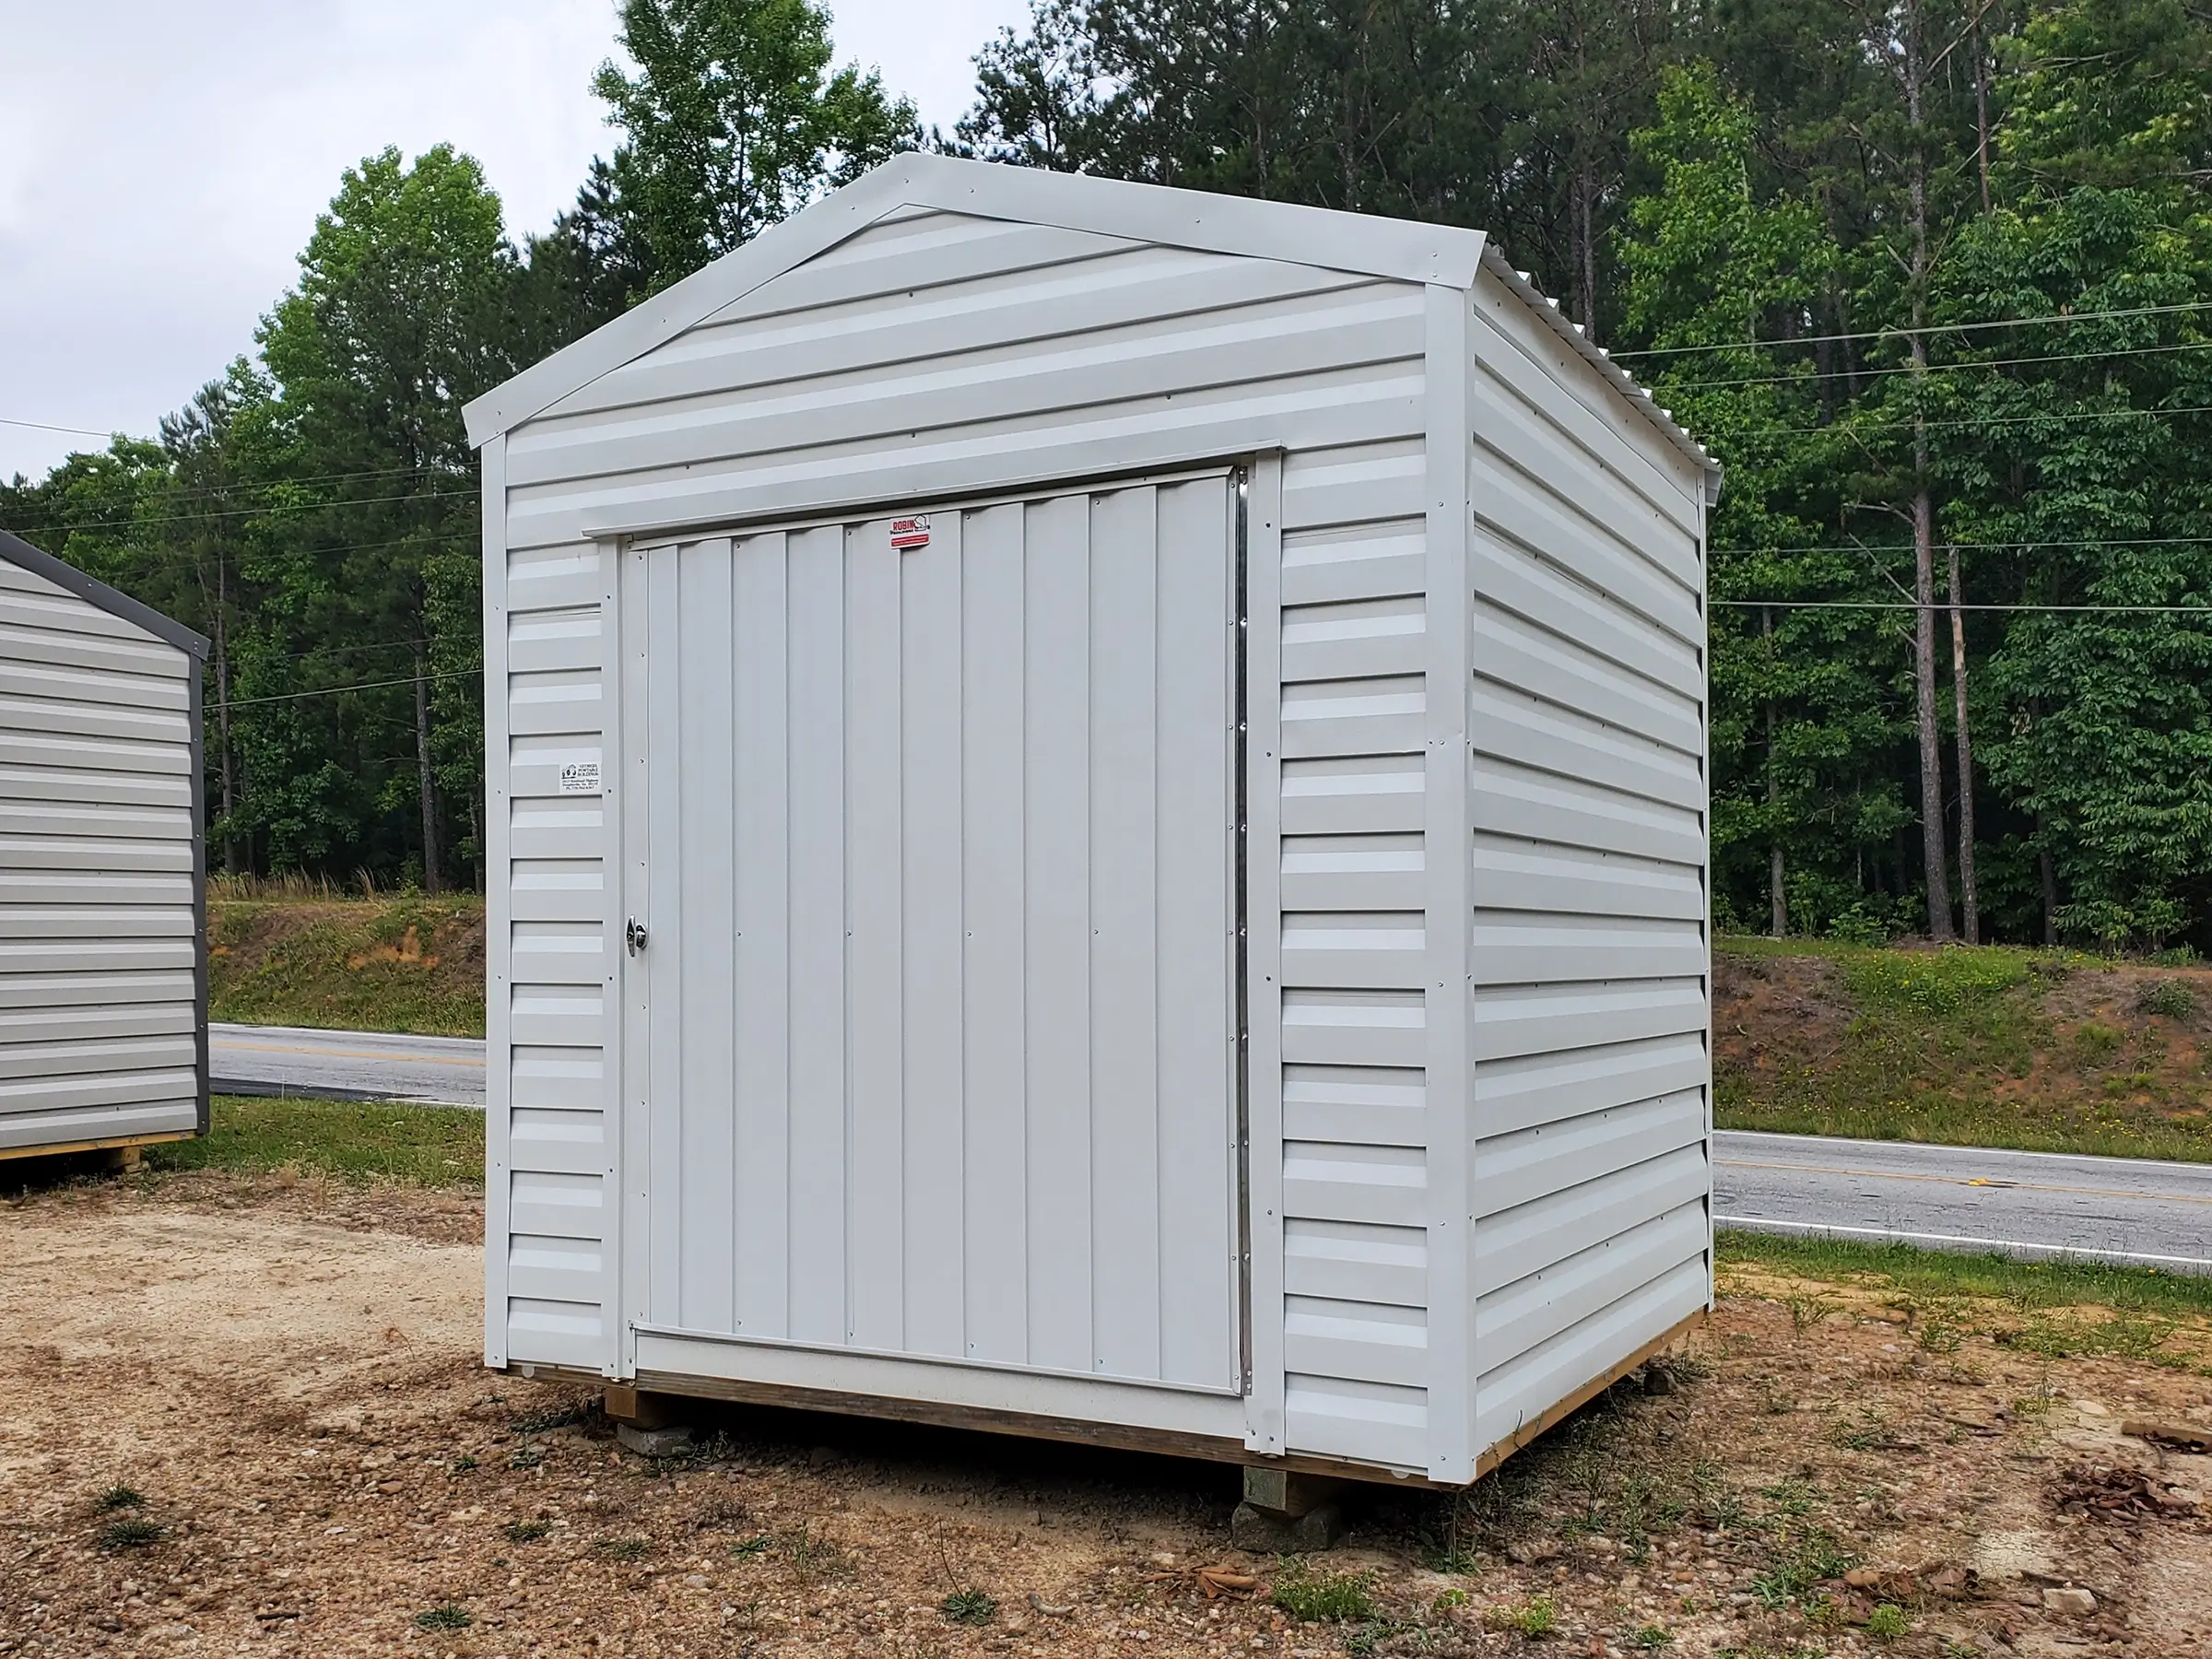 Pictured is a portable building with white siding and white trim in the size 8x8.